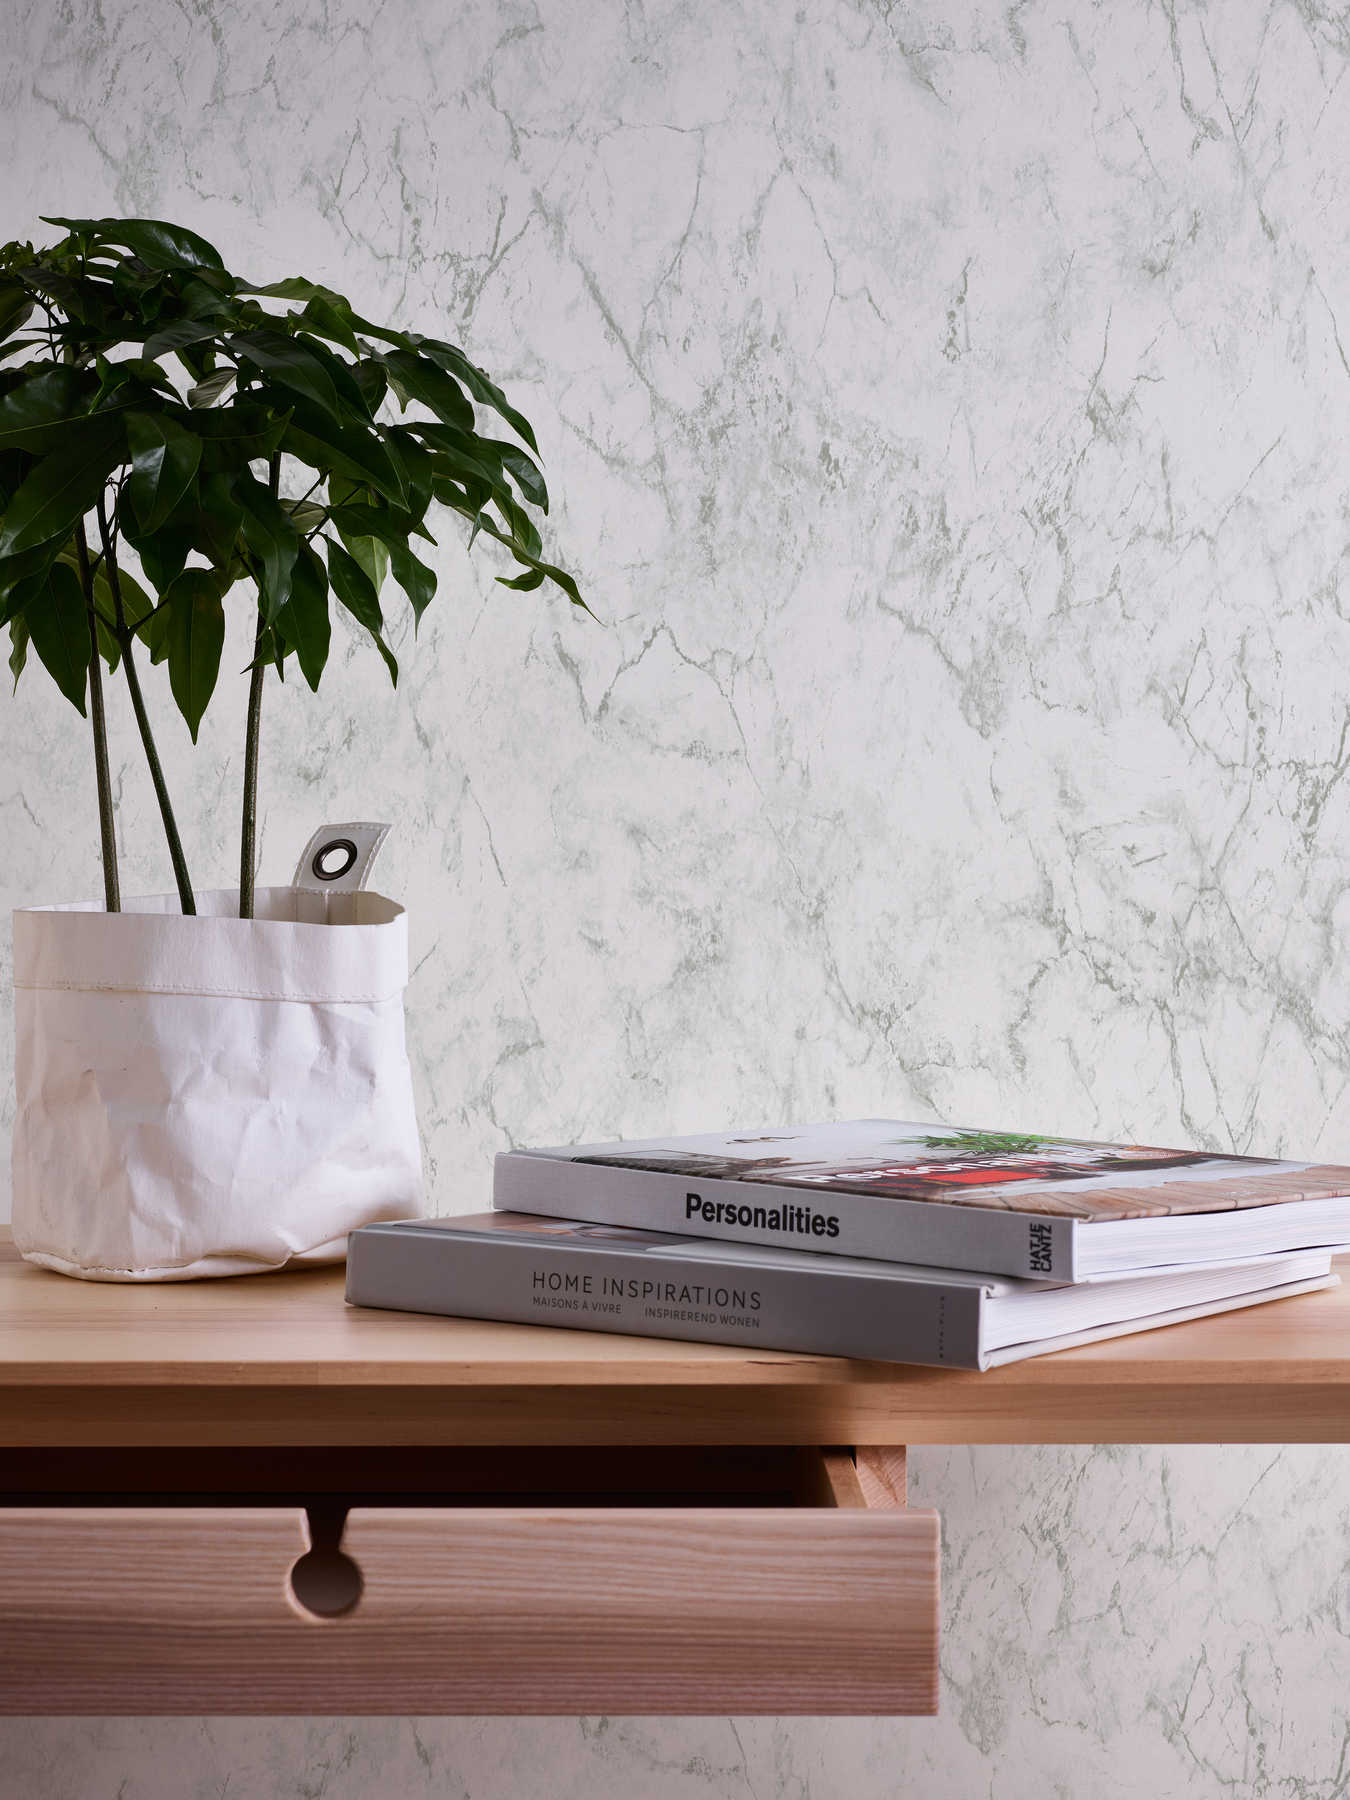             Non-woven wallpaper with fine marble look - white, green-grey
        